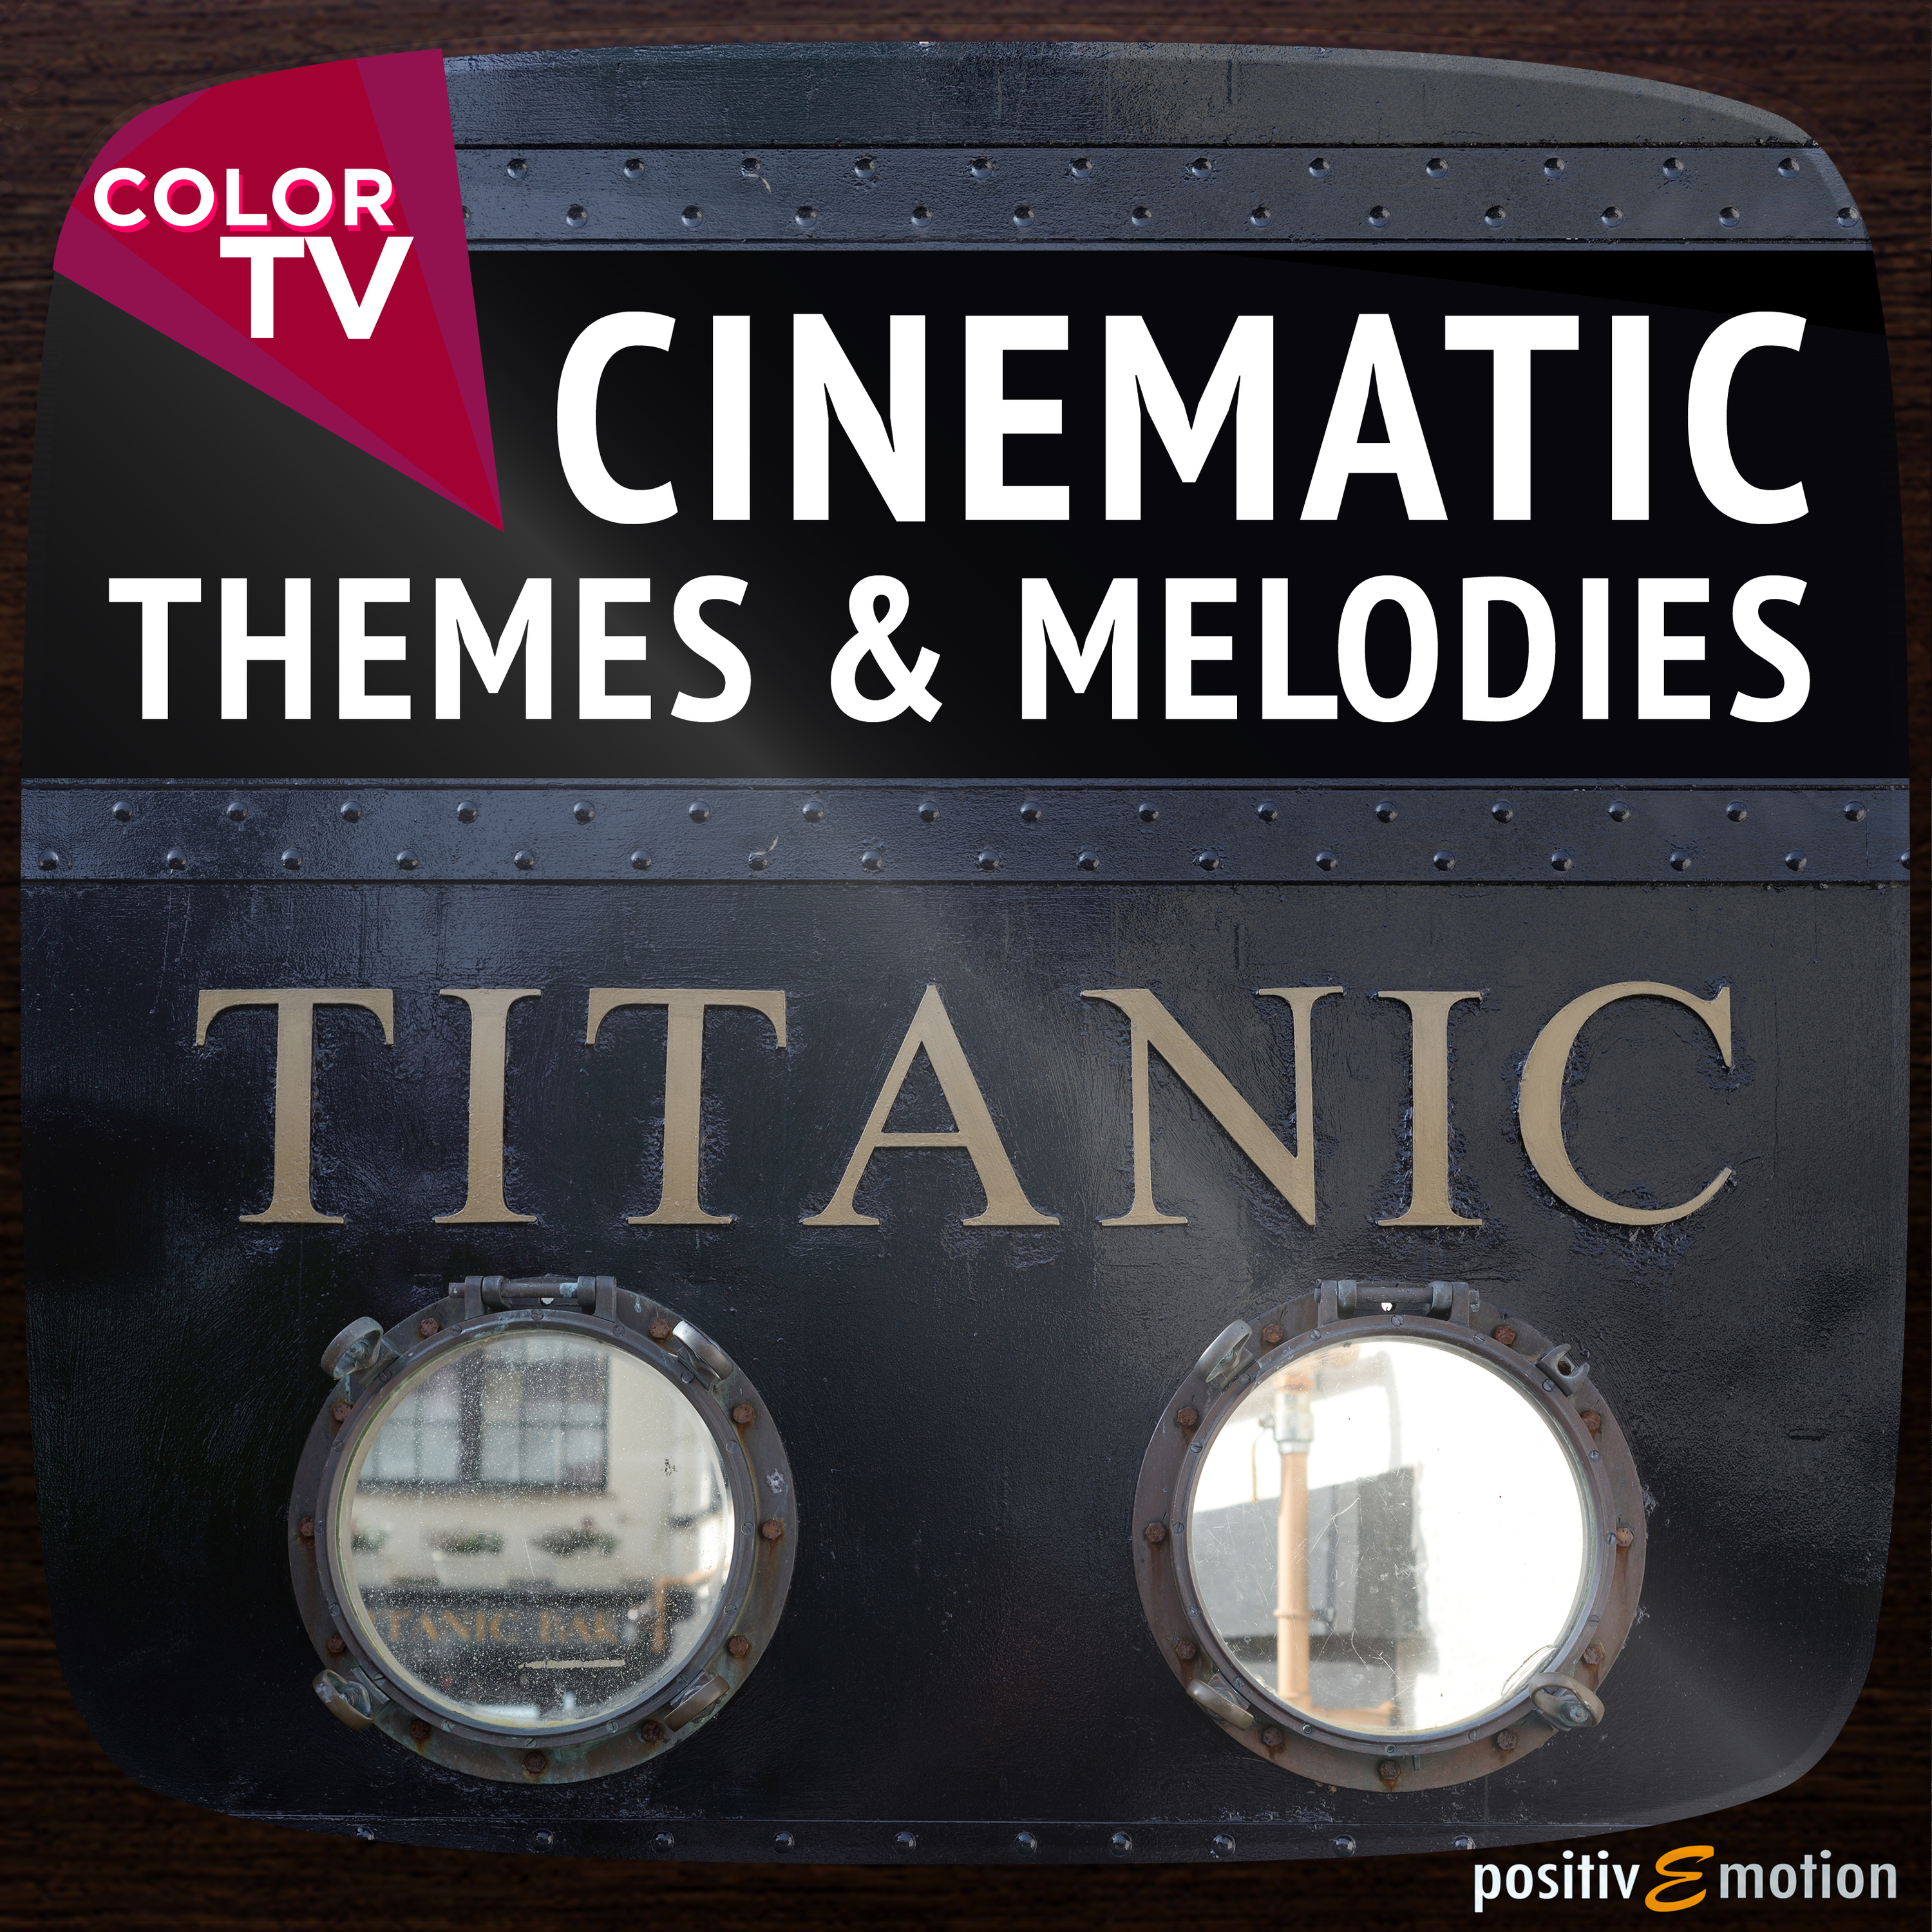 Cinematic Themes & Melodies